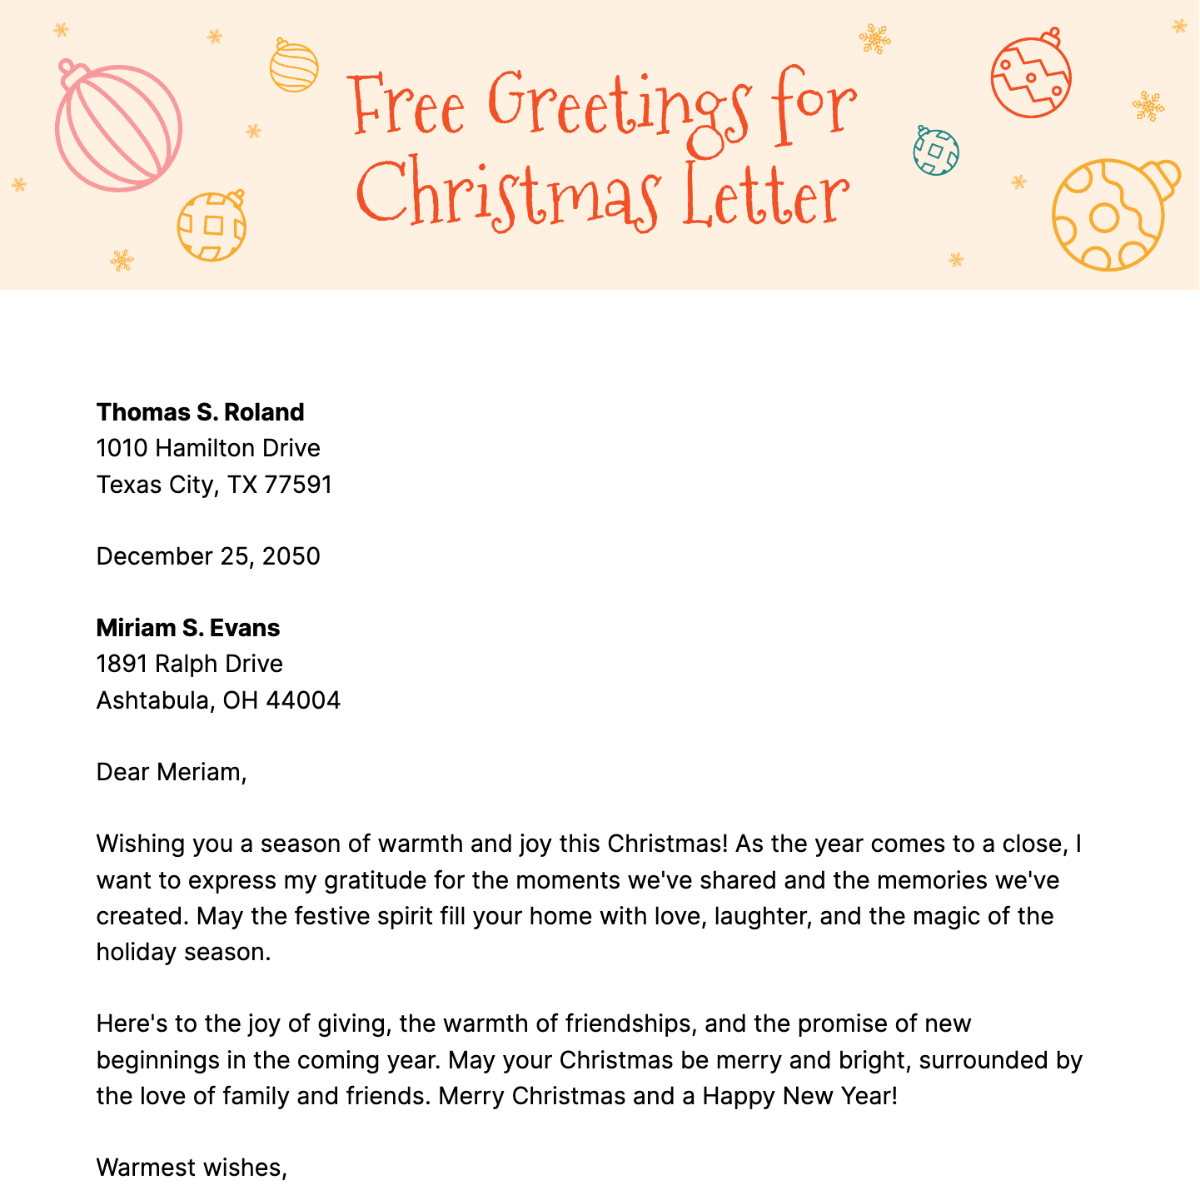 Greetings for Christmas Letter Template